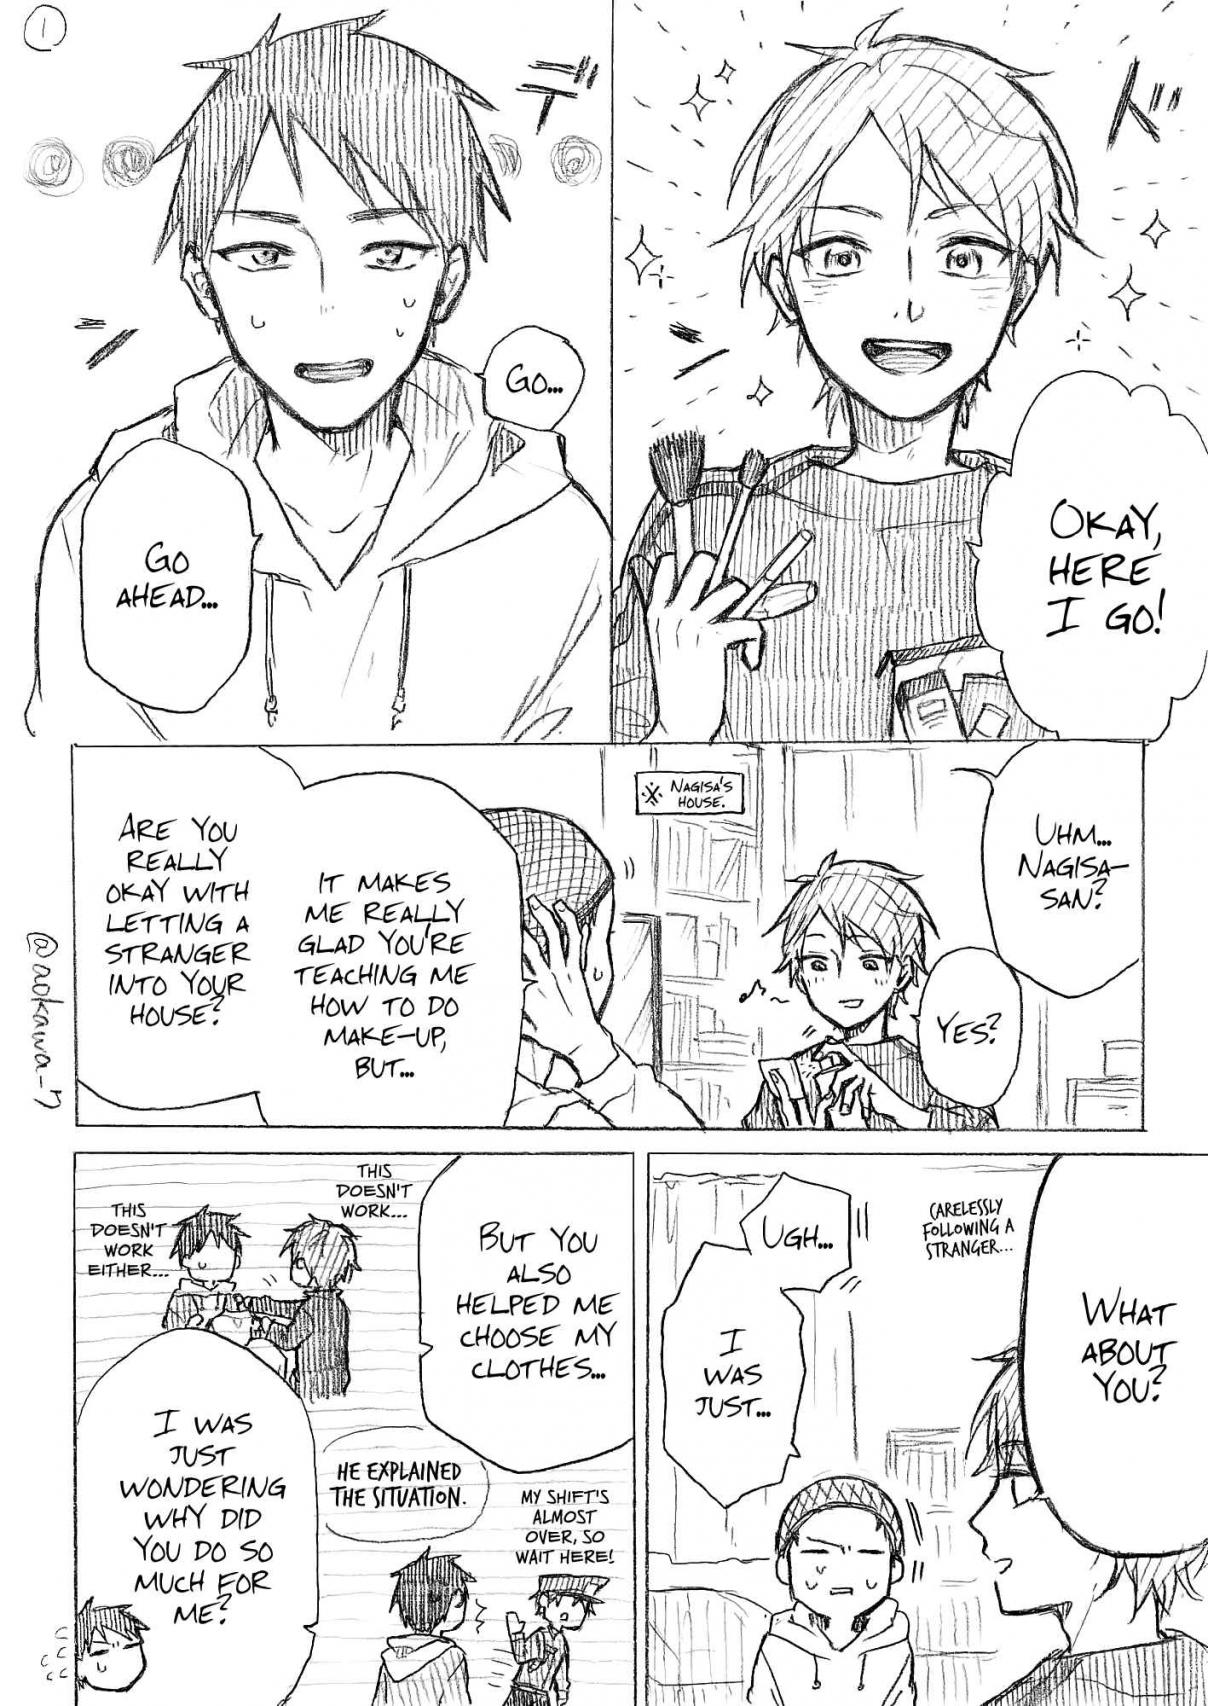 The Manga Where a Crossdressing Cosplayer Gets a Brother Ch. 5.2 Part 14